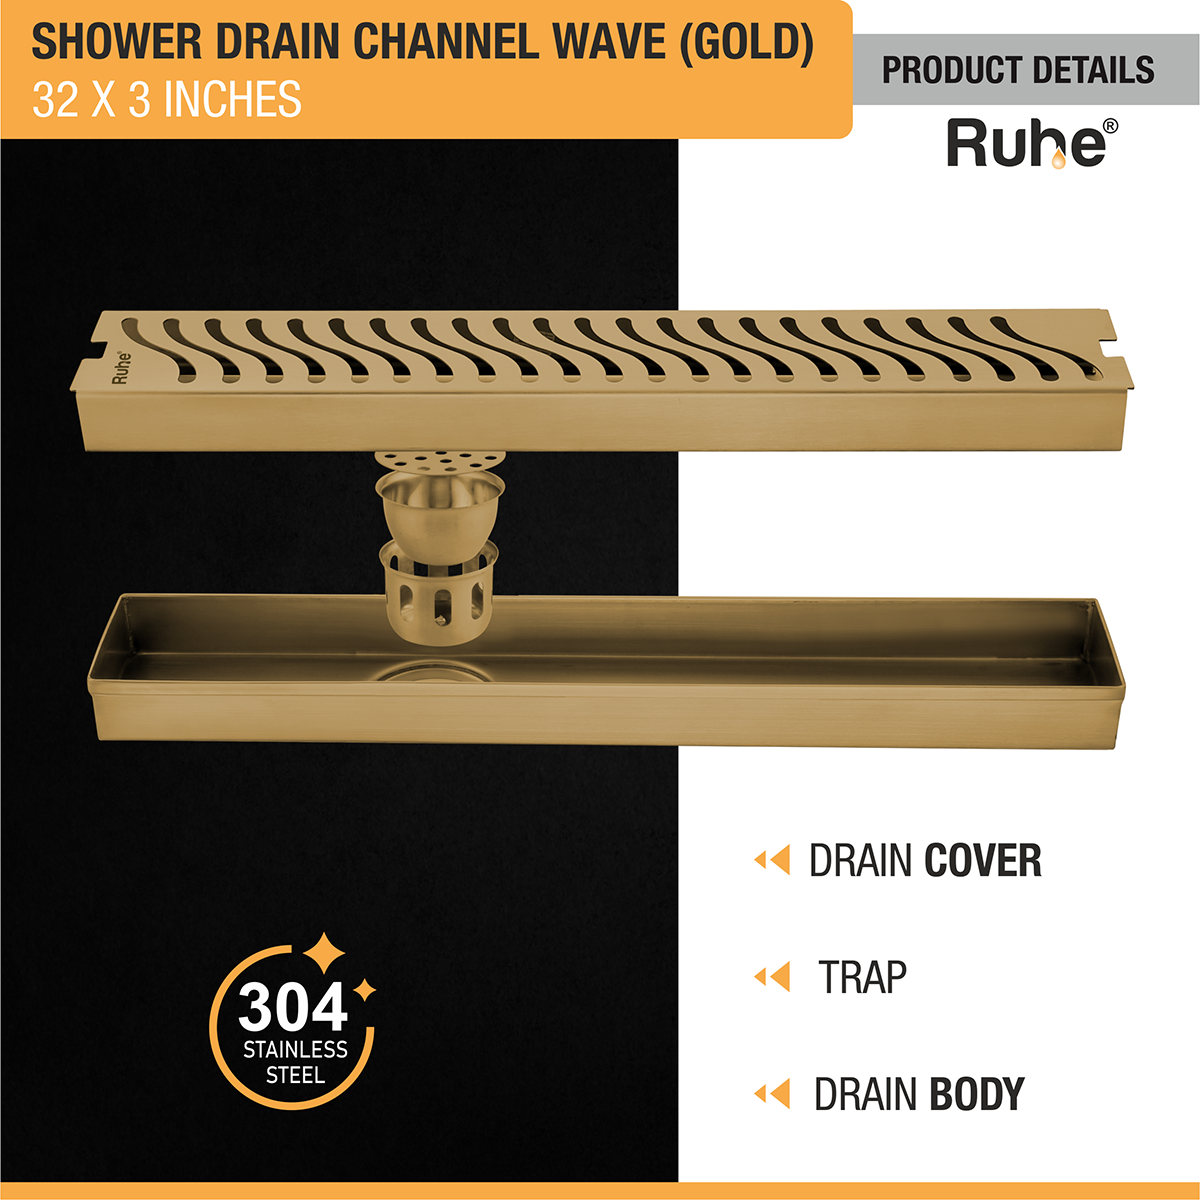 Wave Shower Drain Channel (32 x 3 Inches) YELLOW GOLD product details